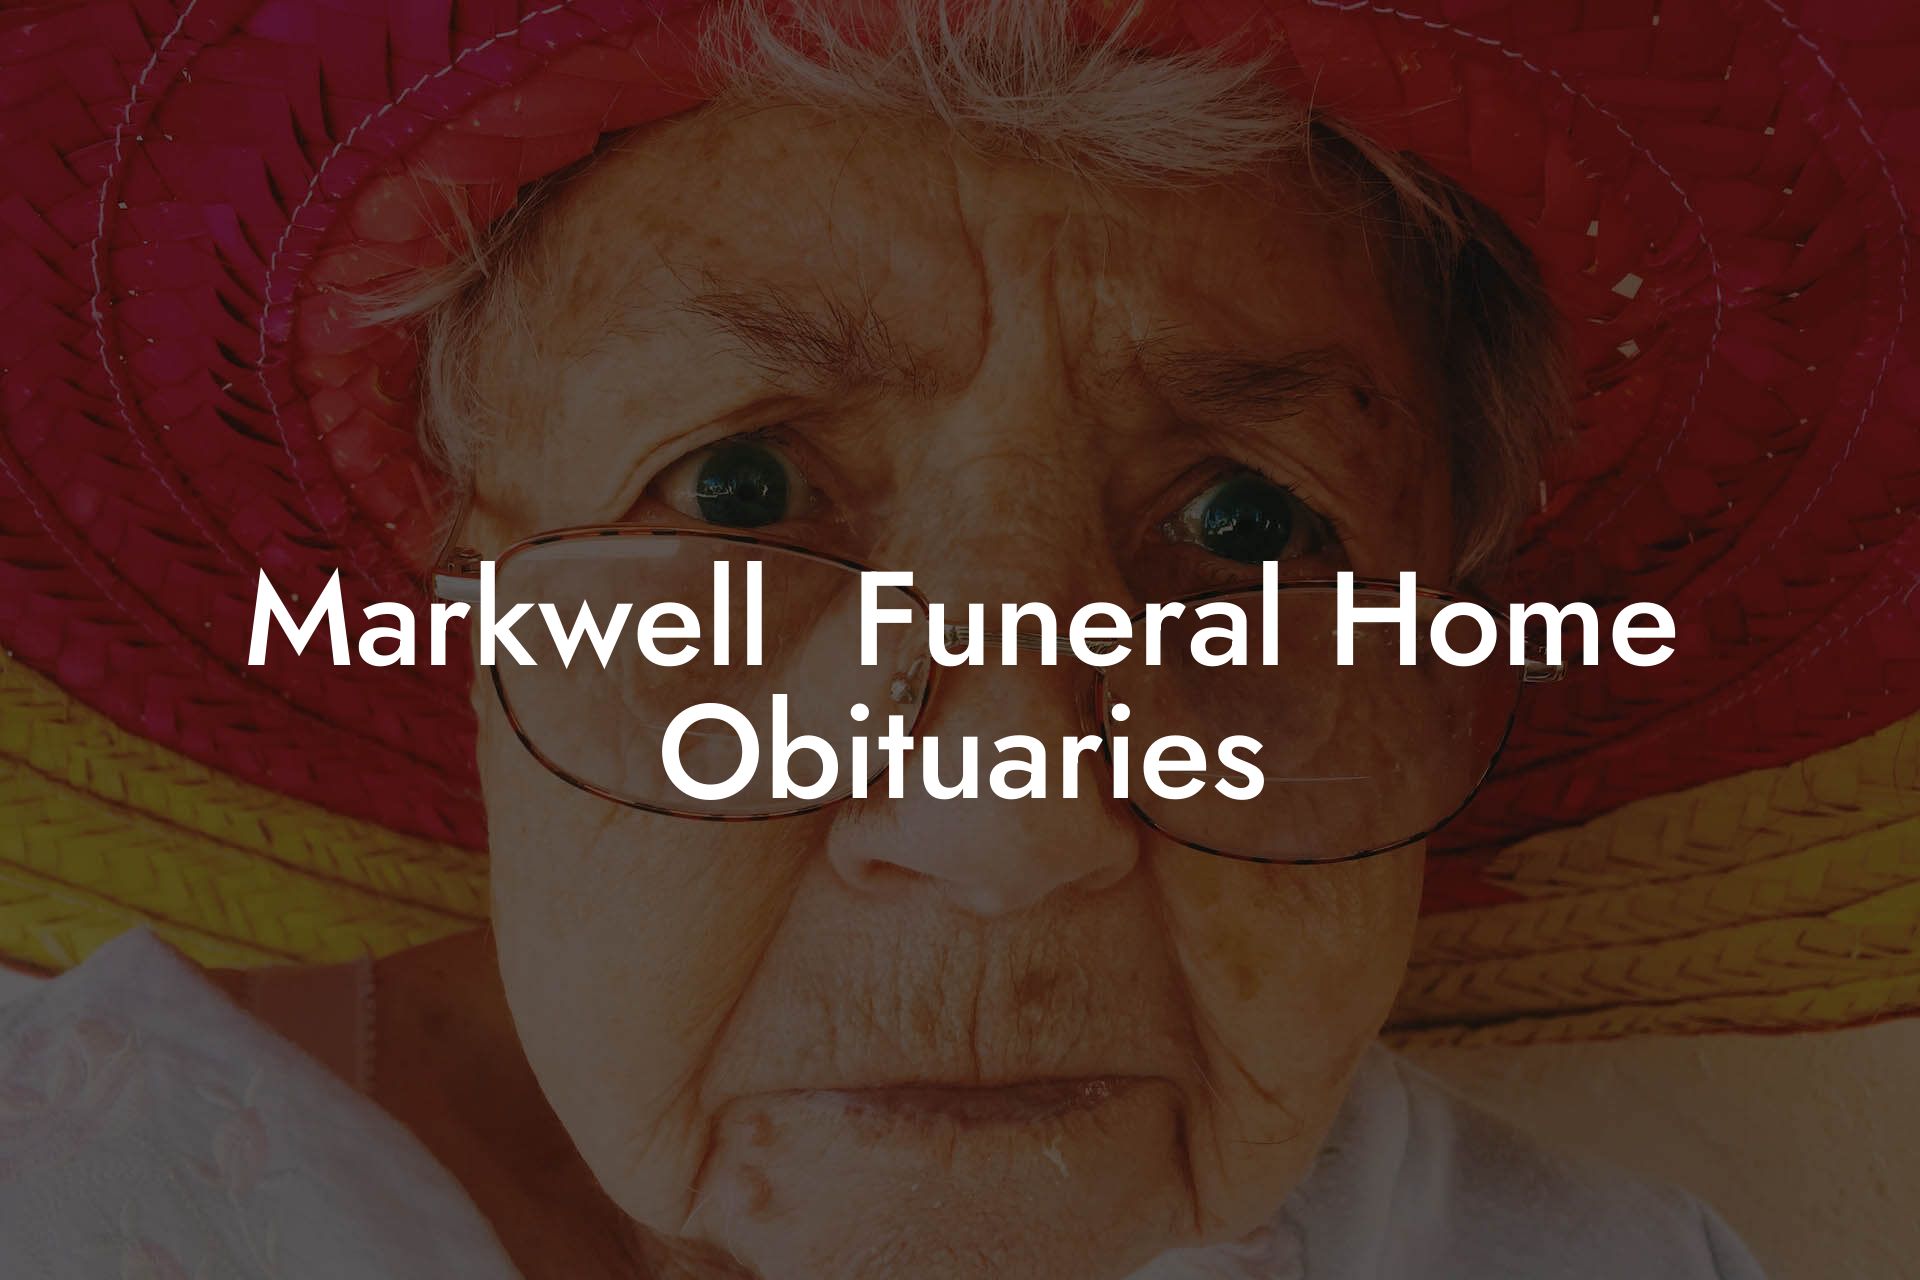 Markwell Funeral Home Obituaries